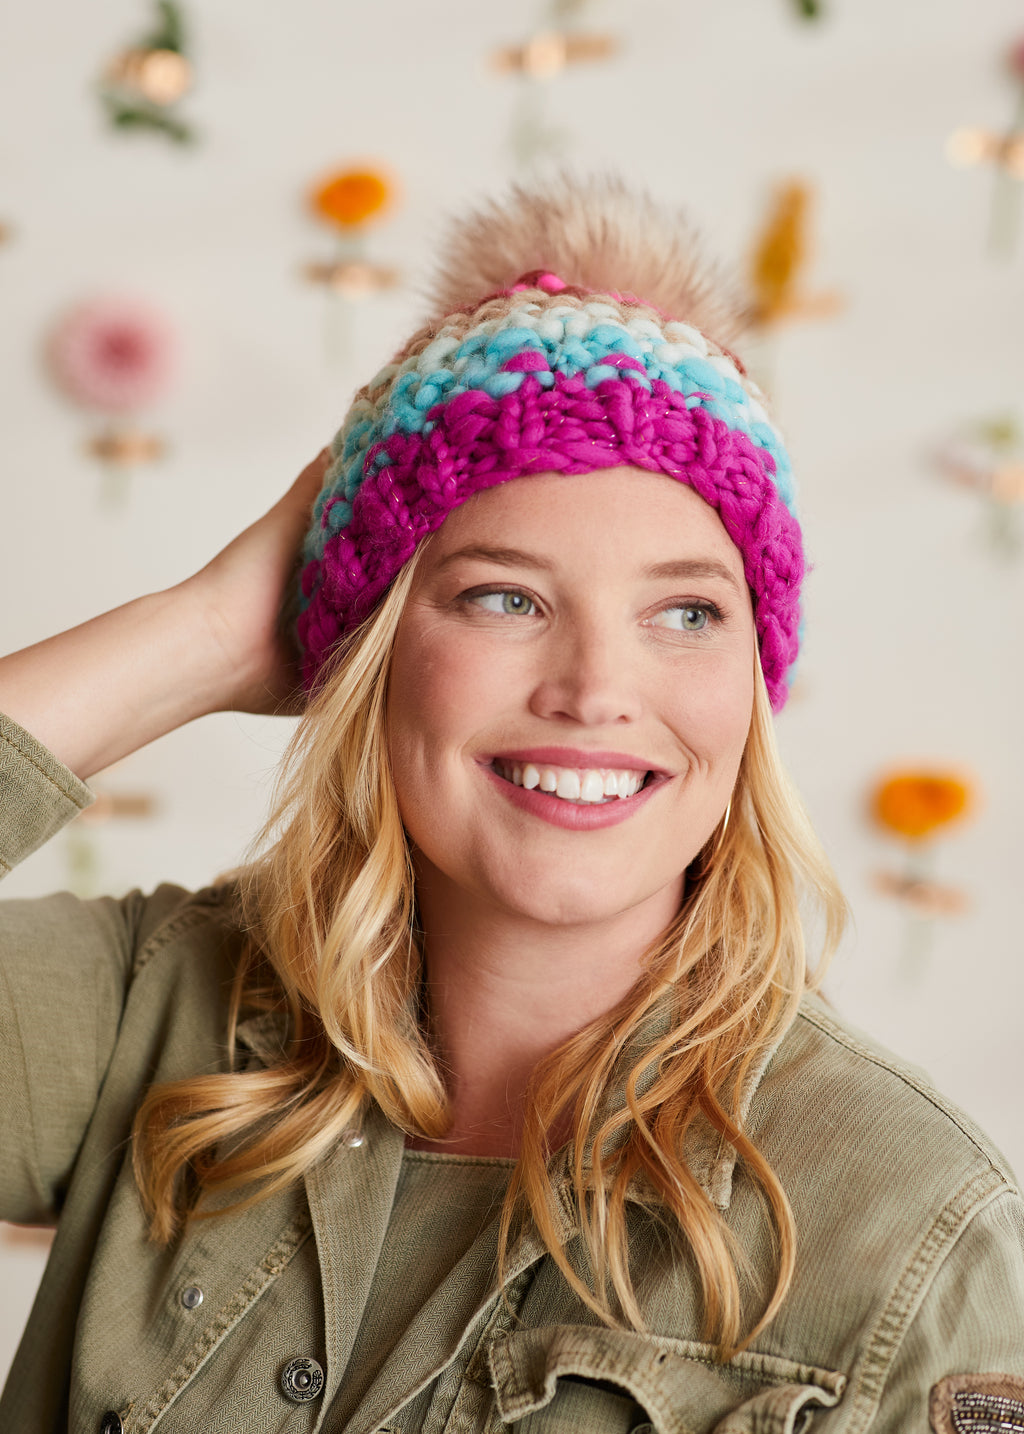 Woman wearing a knit wool hat and smiling at the camera.